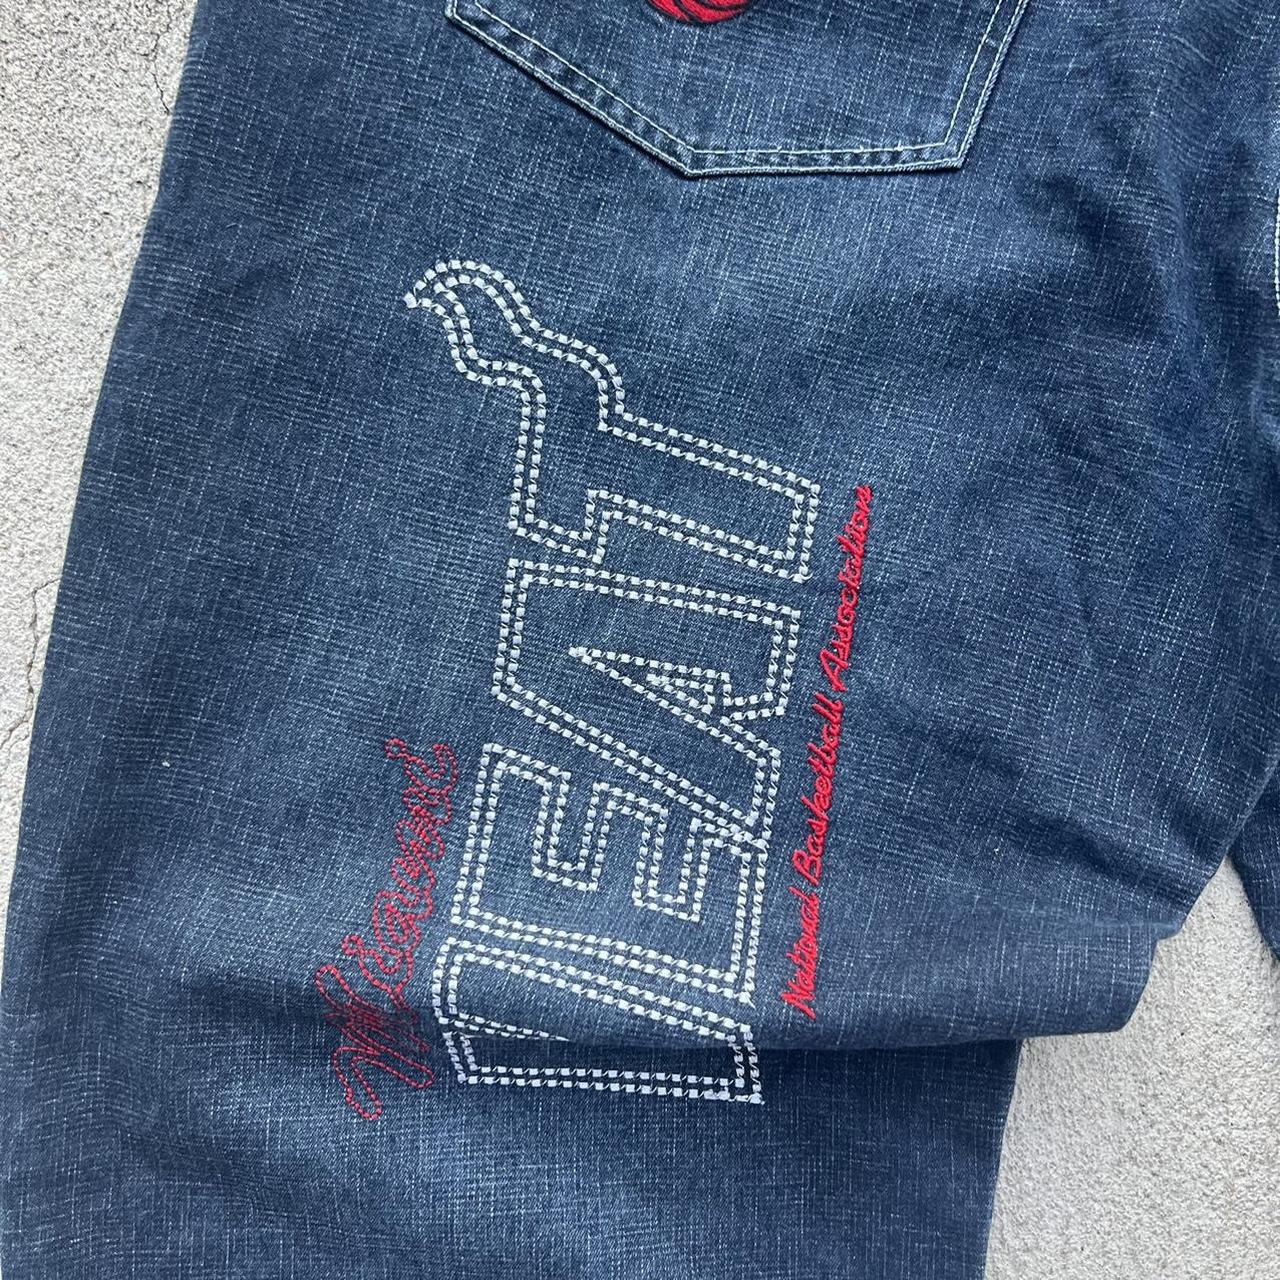 Vintage NBA Unk Official Patch Jeans These jeans are - Depop